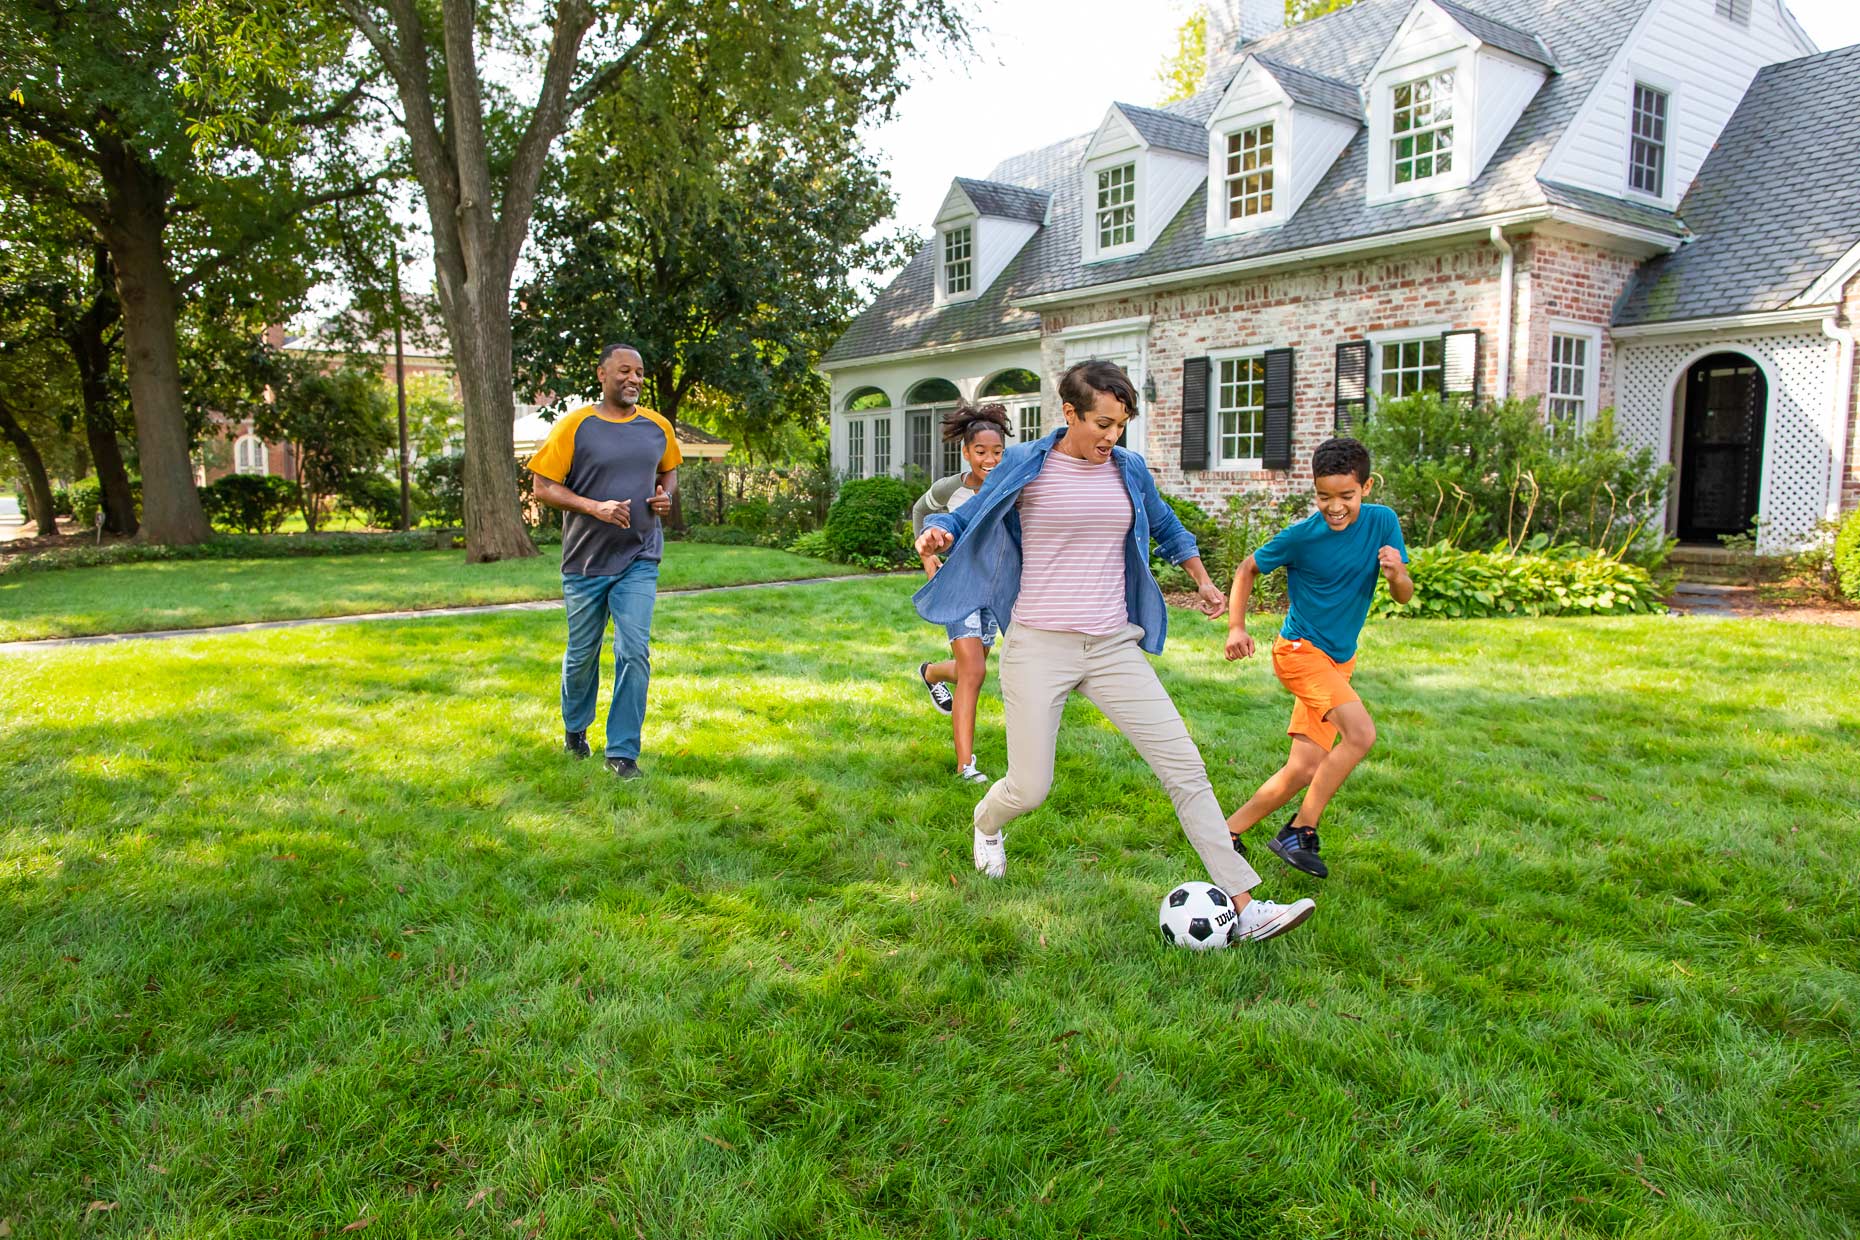 _09876_family-playing-soccer-in-front-yard_Robert-Holland